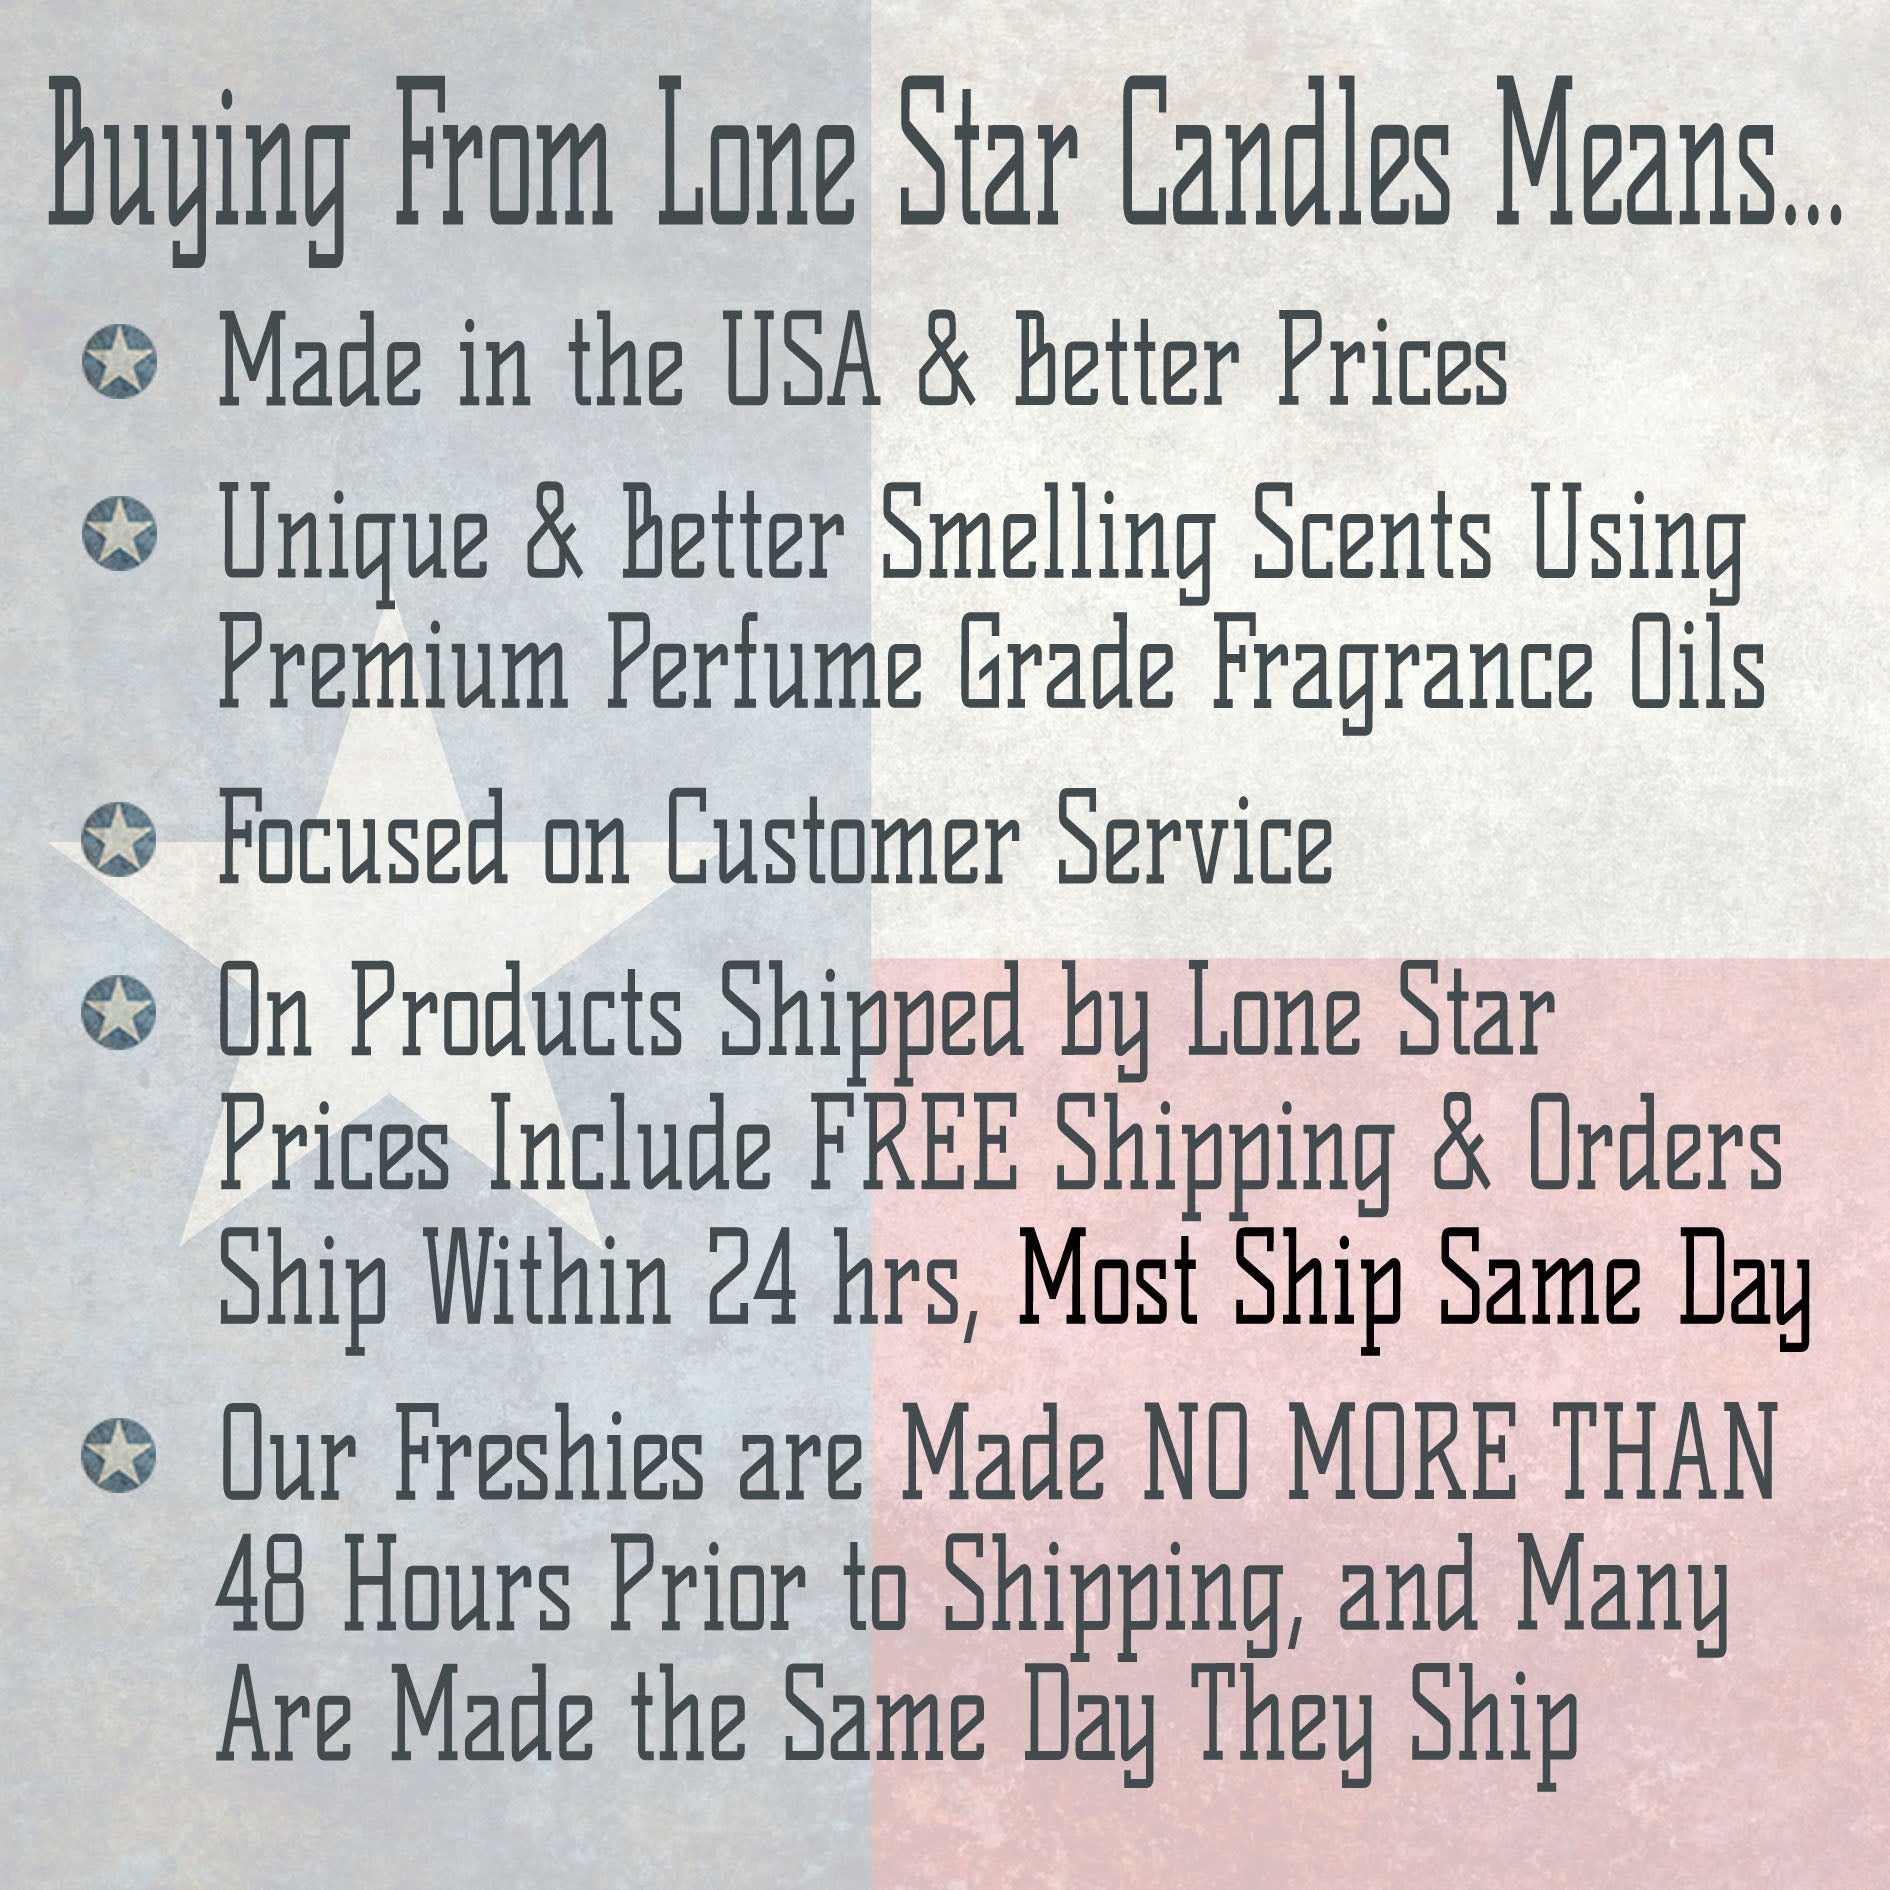 Strawberry Leather, Lone Star Candles & More's Premium Strongly Scented Freshies, Genuine Leather Aroma with Sweet & Juicy Strawberries, Car & Air Freshener, USA & Texas Made, Gnome 1-Pack